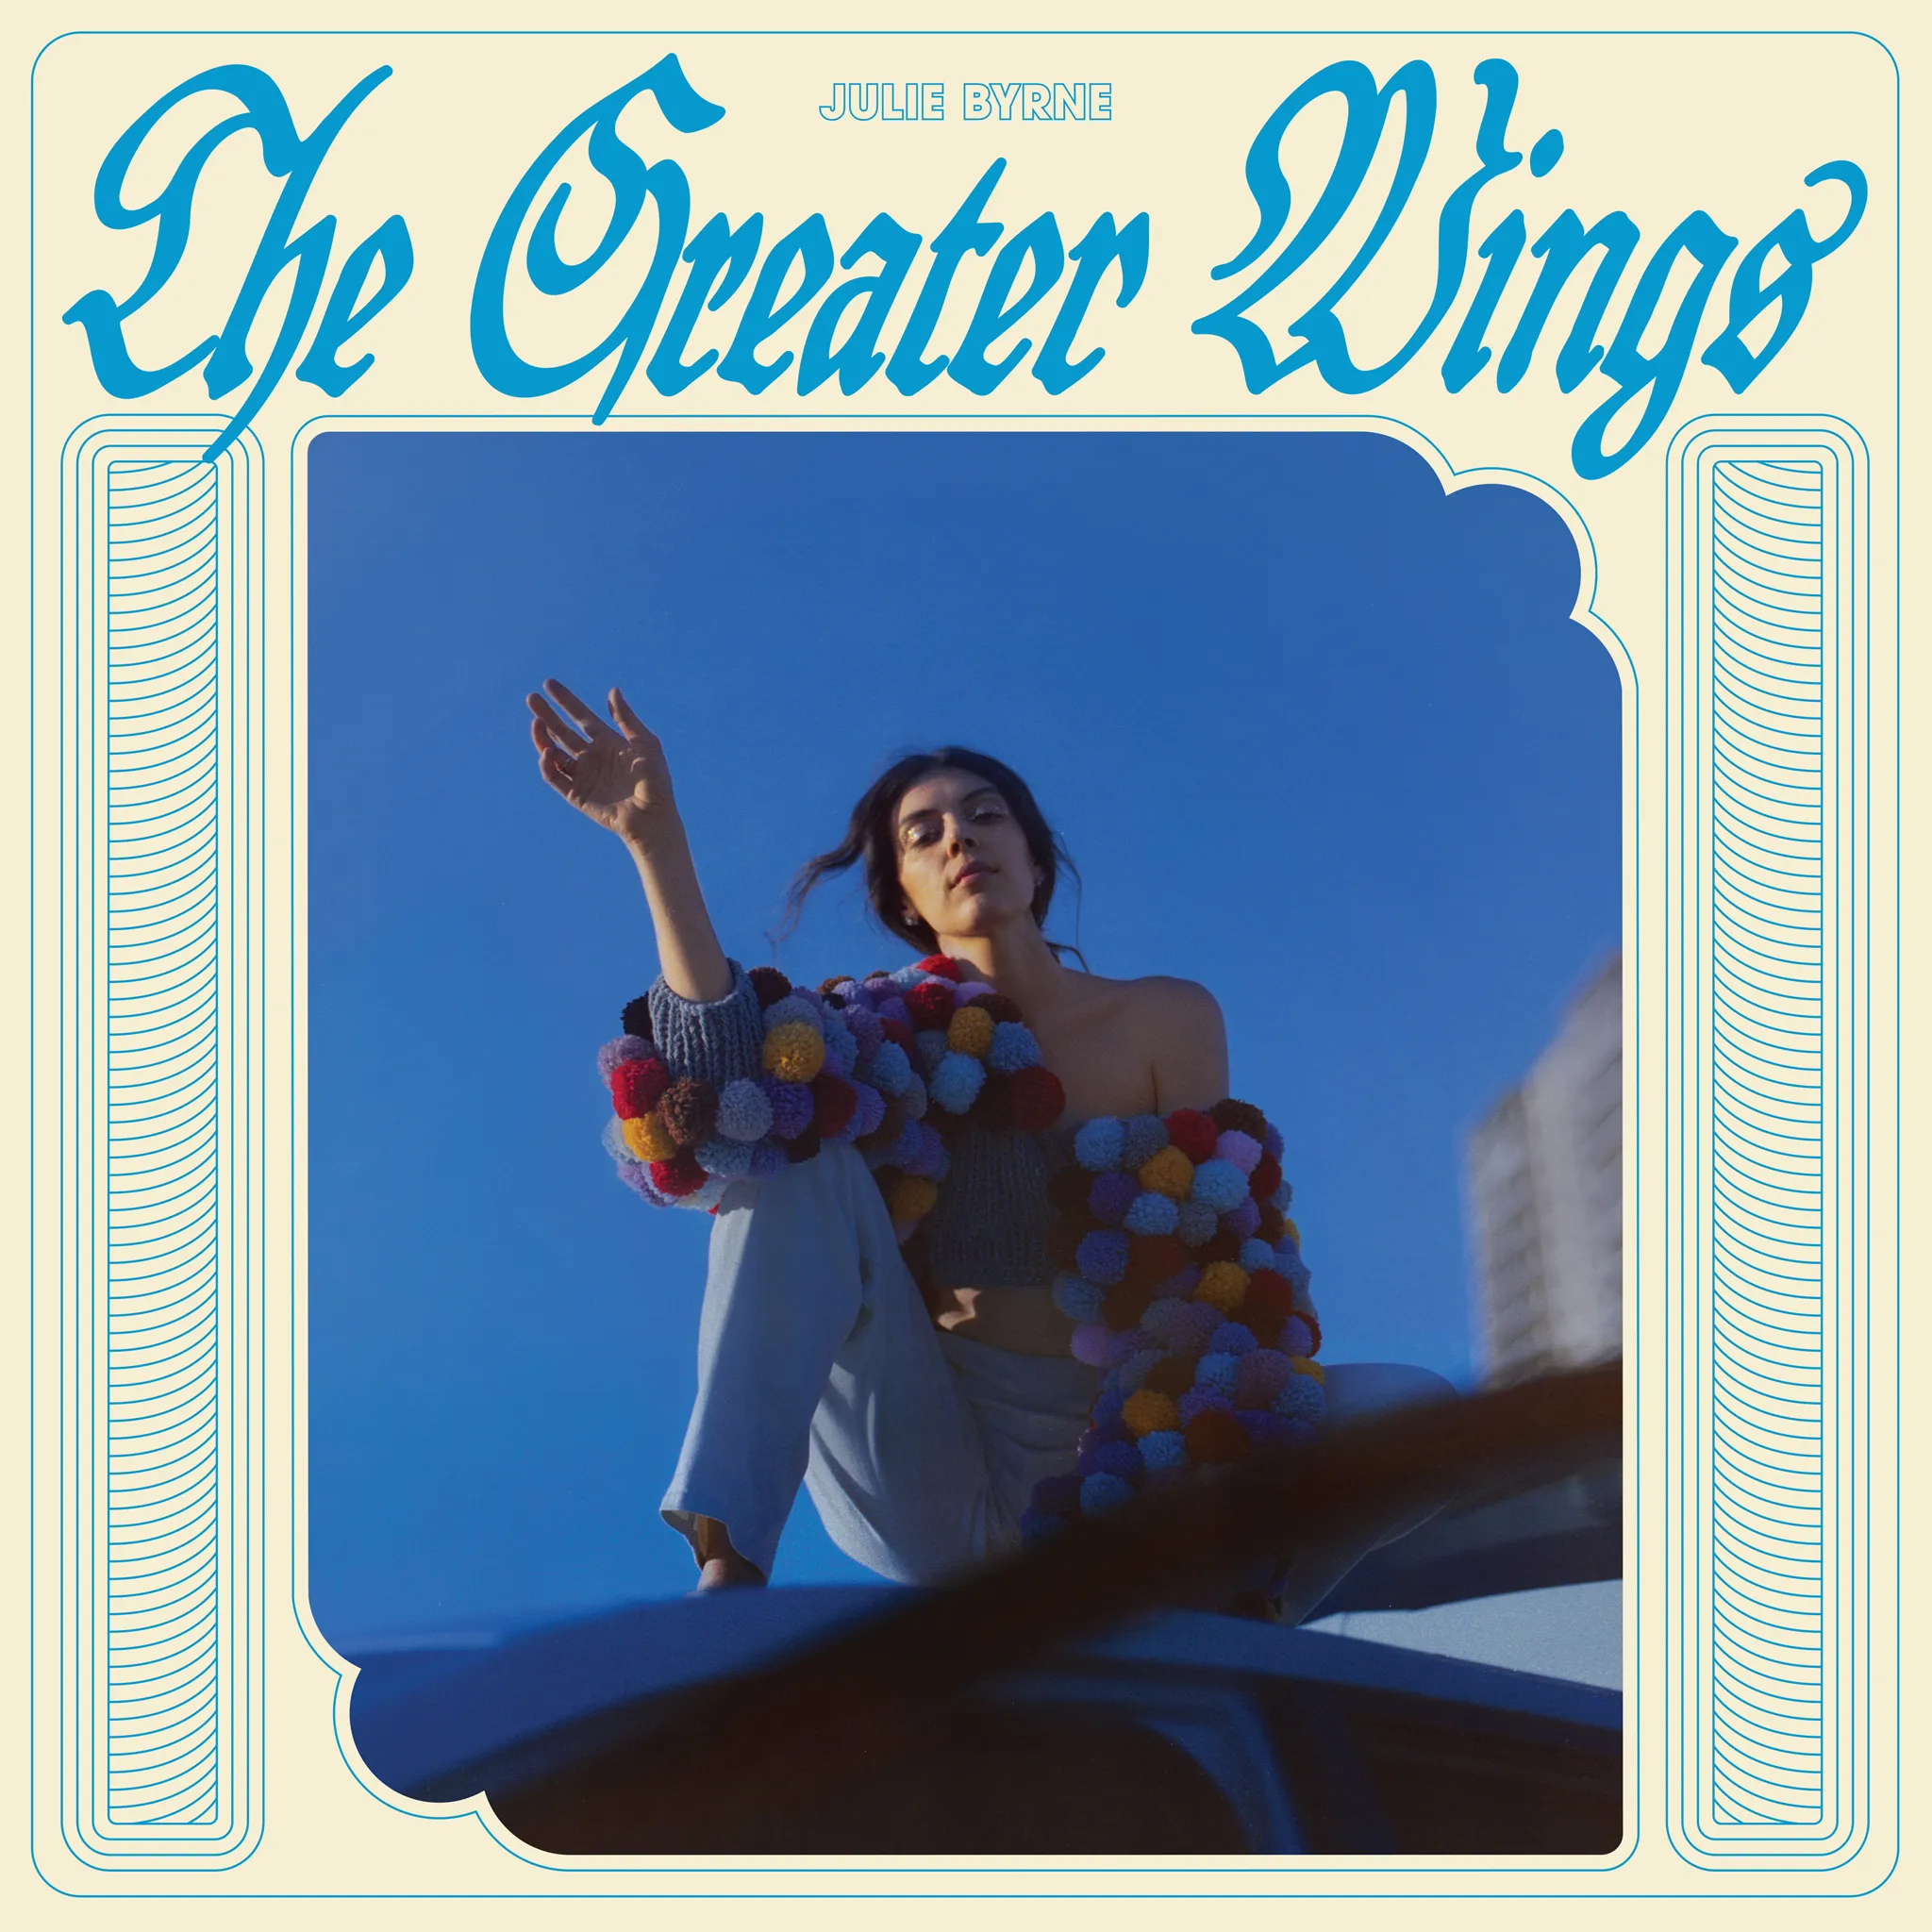 <strong>Julie Byrne - The Greater Wings</strong> (Vinyl LP - blue)